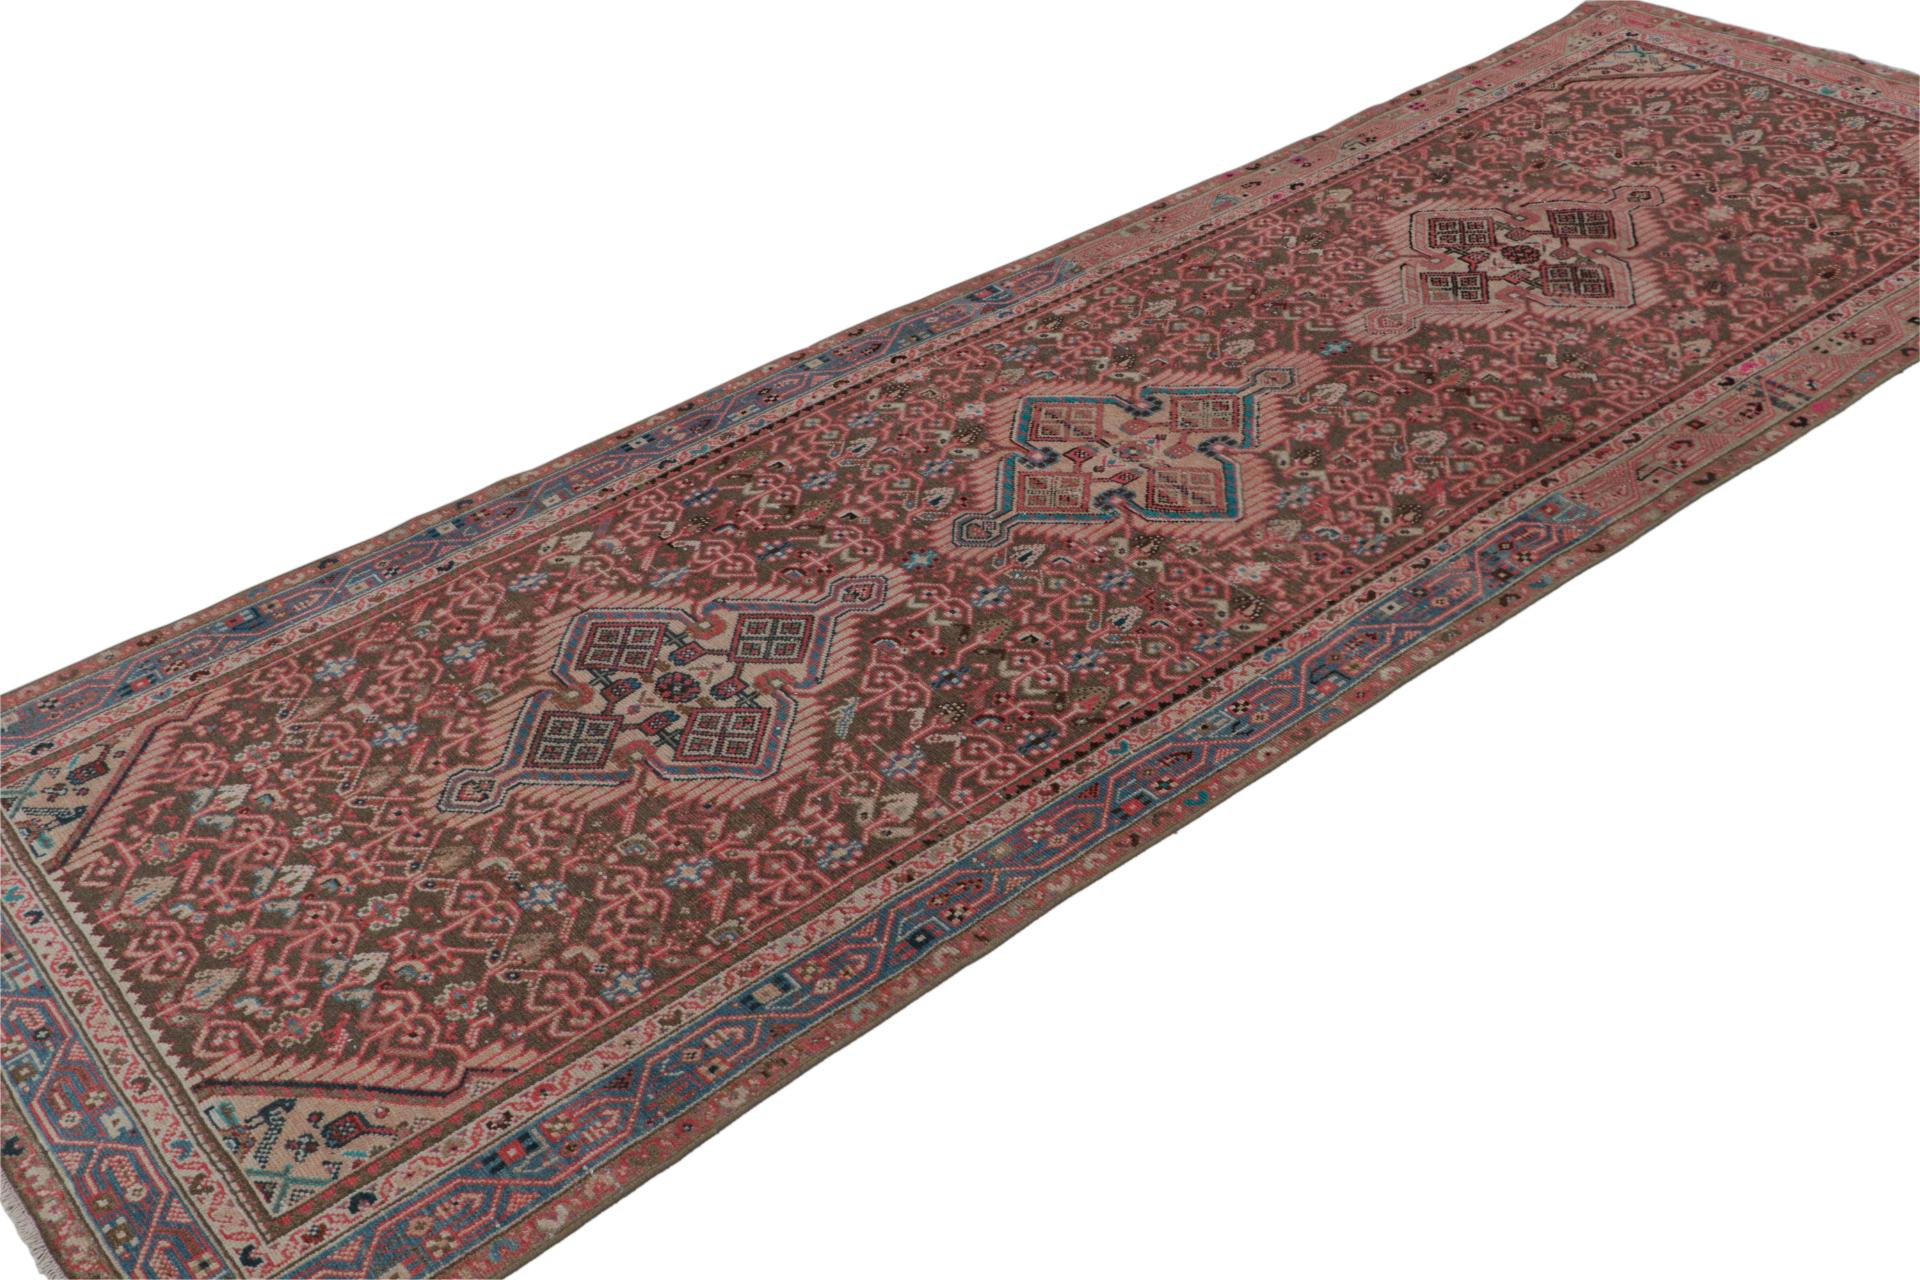 Hand knotted in wool, a 4x10 Persian rug circa 1970-1980 - latest to join Rug & Kilim’s vintage selections.

On the Design:

The runner enjoys geometric patterns in red and beige-brown. Keen eyes will admire the repetition lending a refined sense of